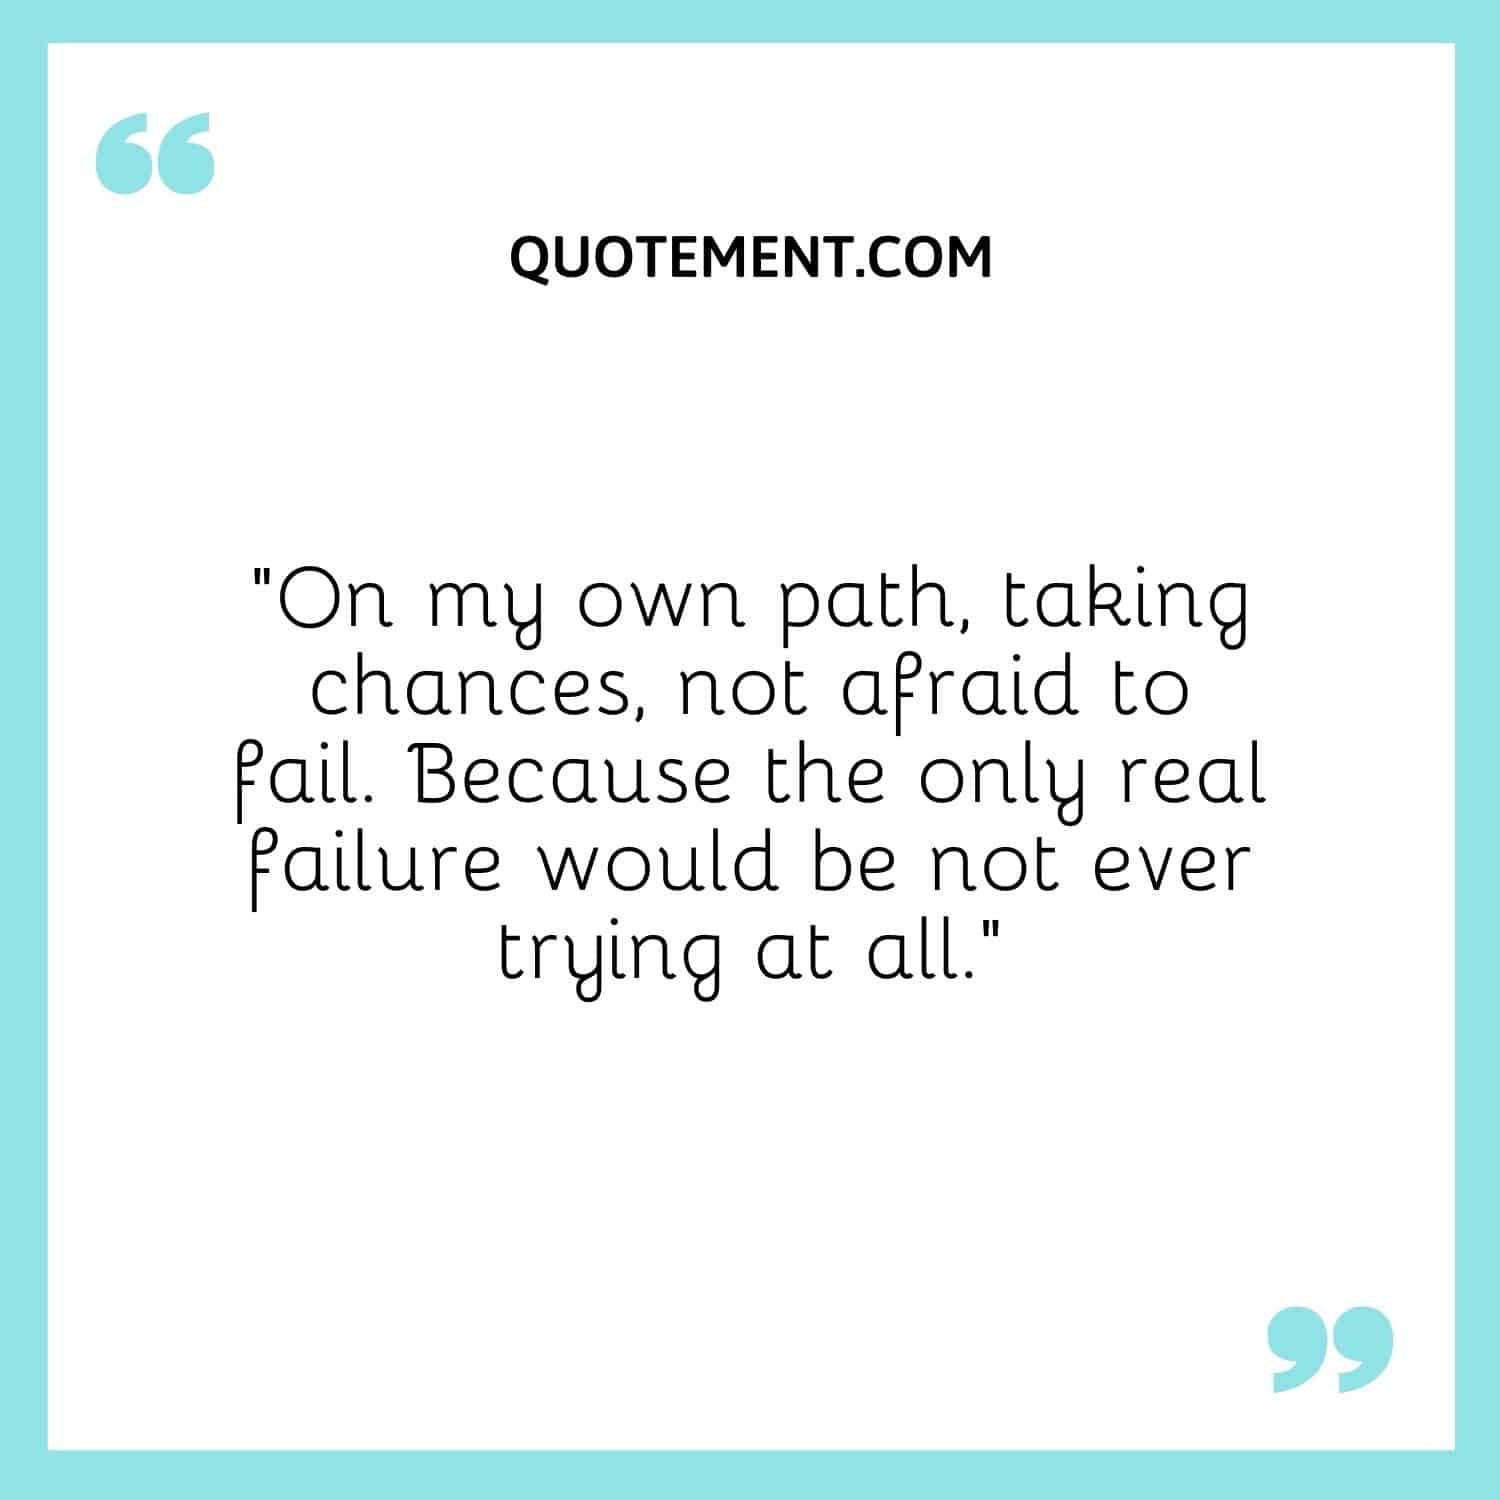 On my own path, taking chances, not afraid to fail. Because the only real failure would be not ever trying at all.